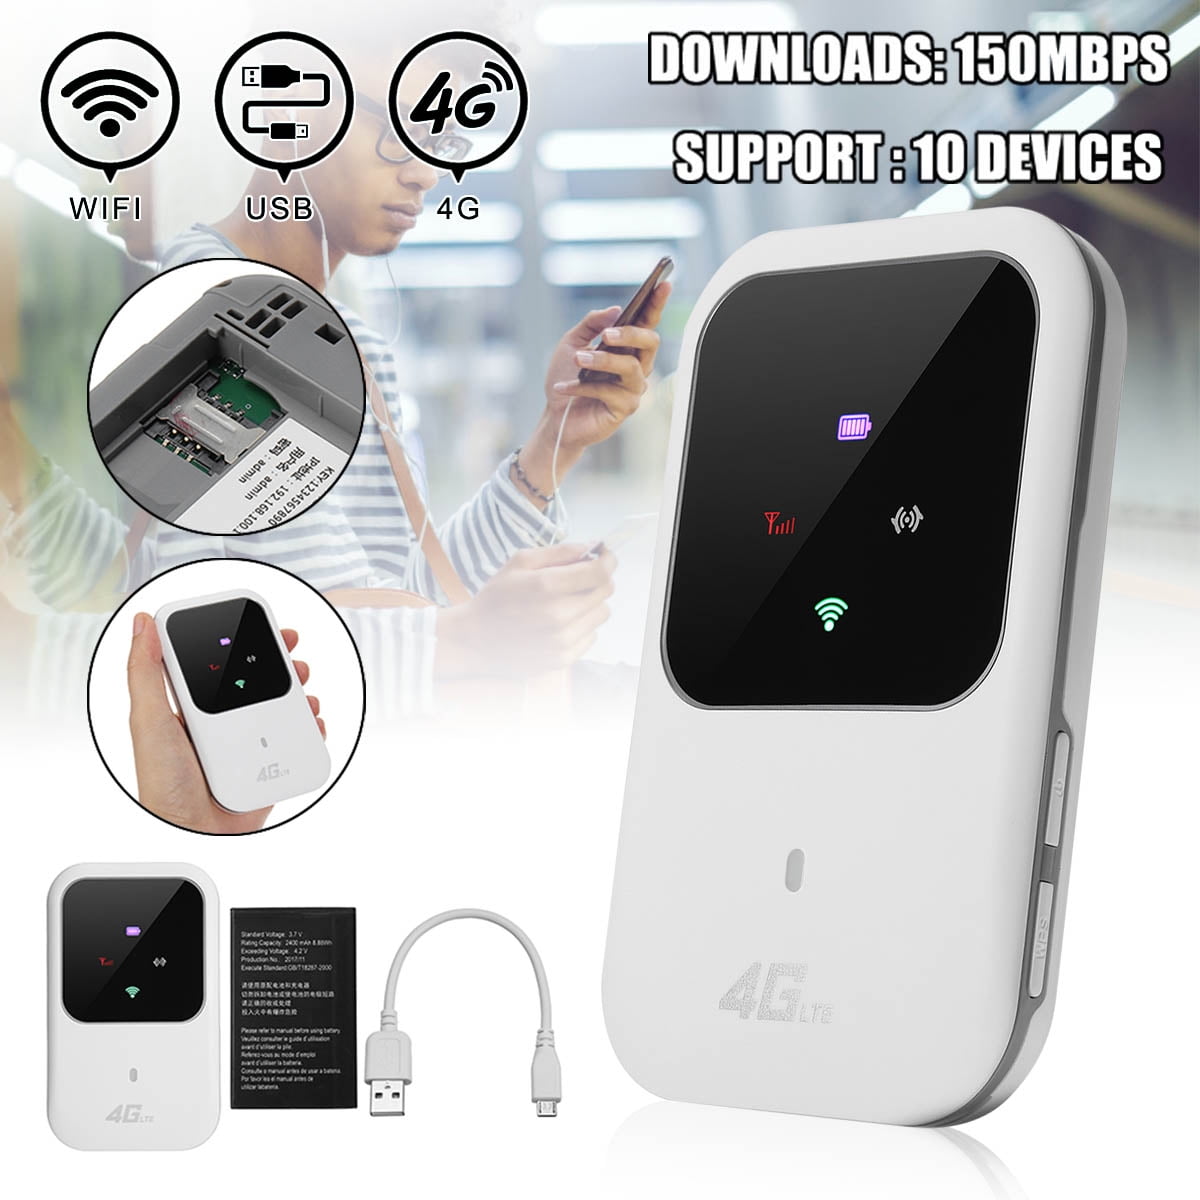 4G LTE Mobile WiFi Router Hotspot LED Lights Supports 5 Users Portable